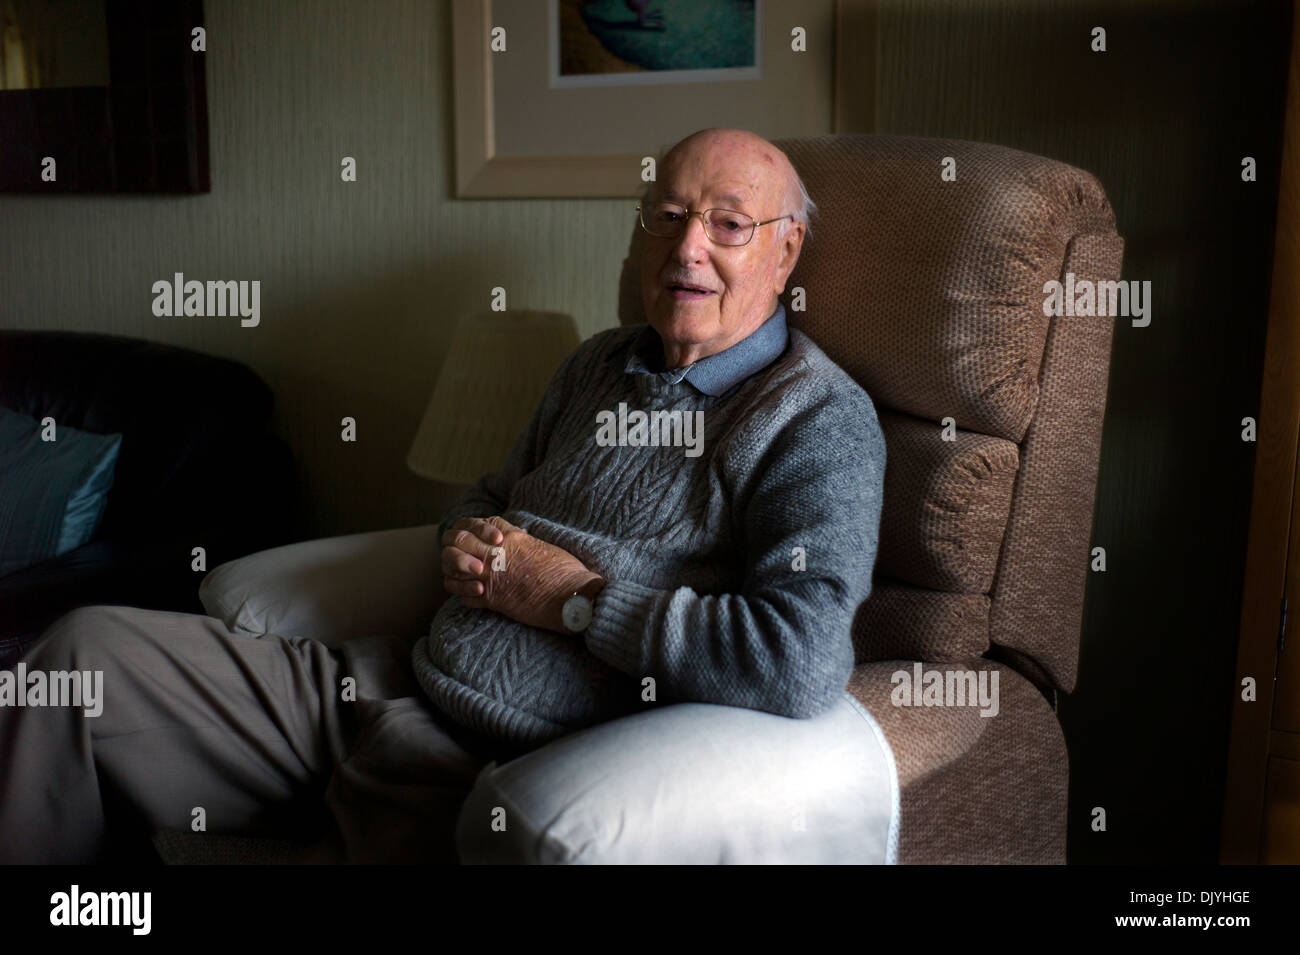 Bertie Stimpson, 91, at Home in Bungay, Suffolk, England. 30-11-2013 Elderly man at home. Stock Photo